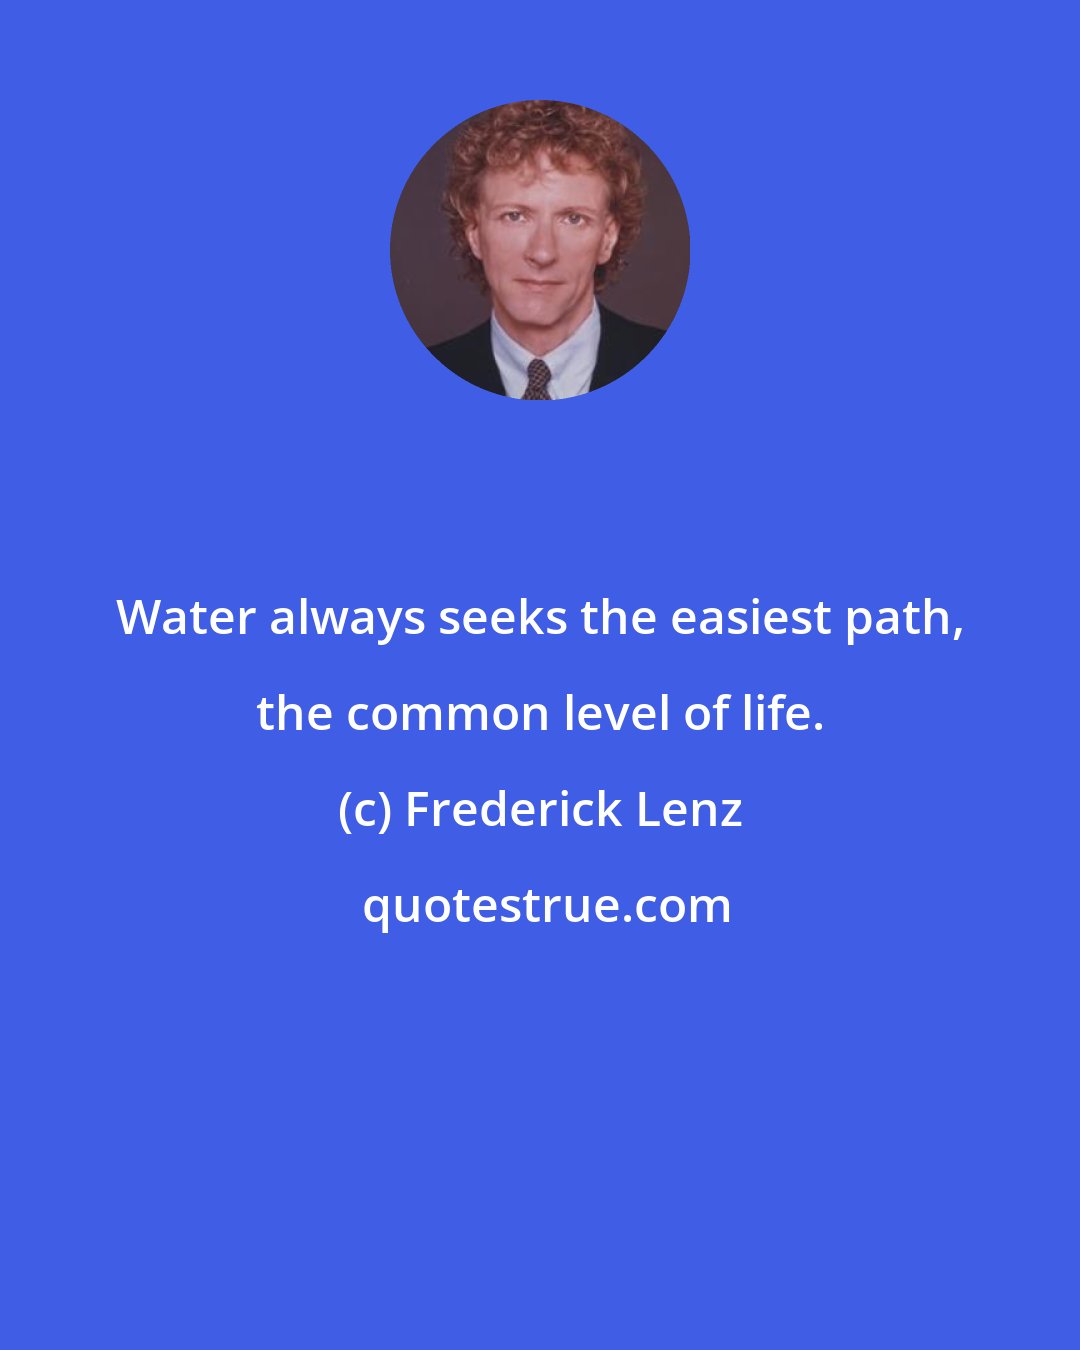 Frederick Lenz: Water always seeks the easiest path, the common level of life.